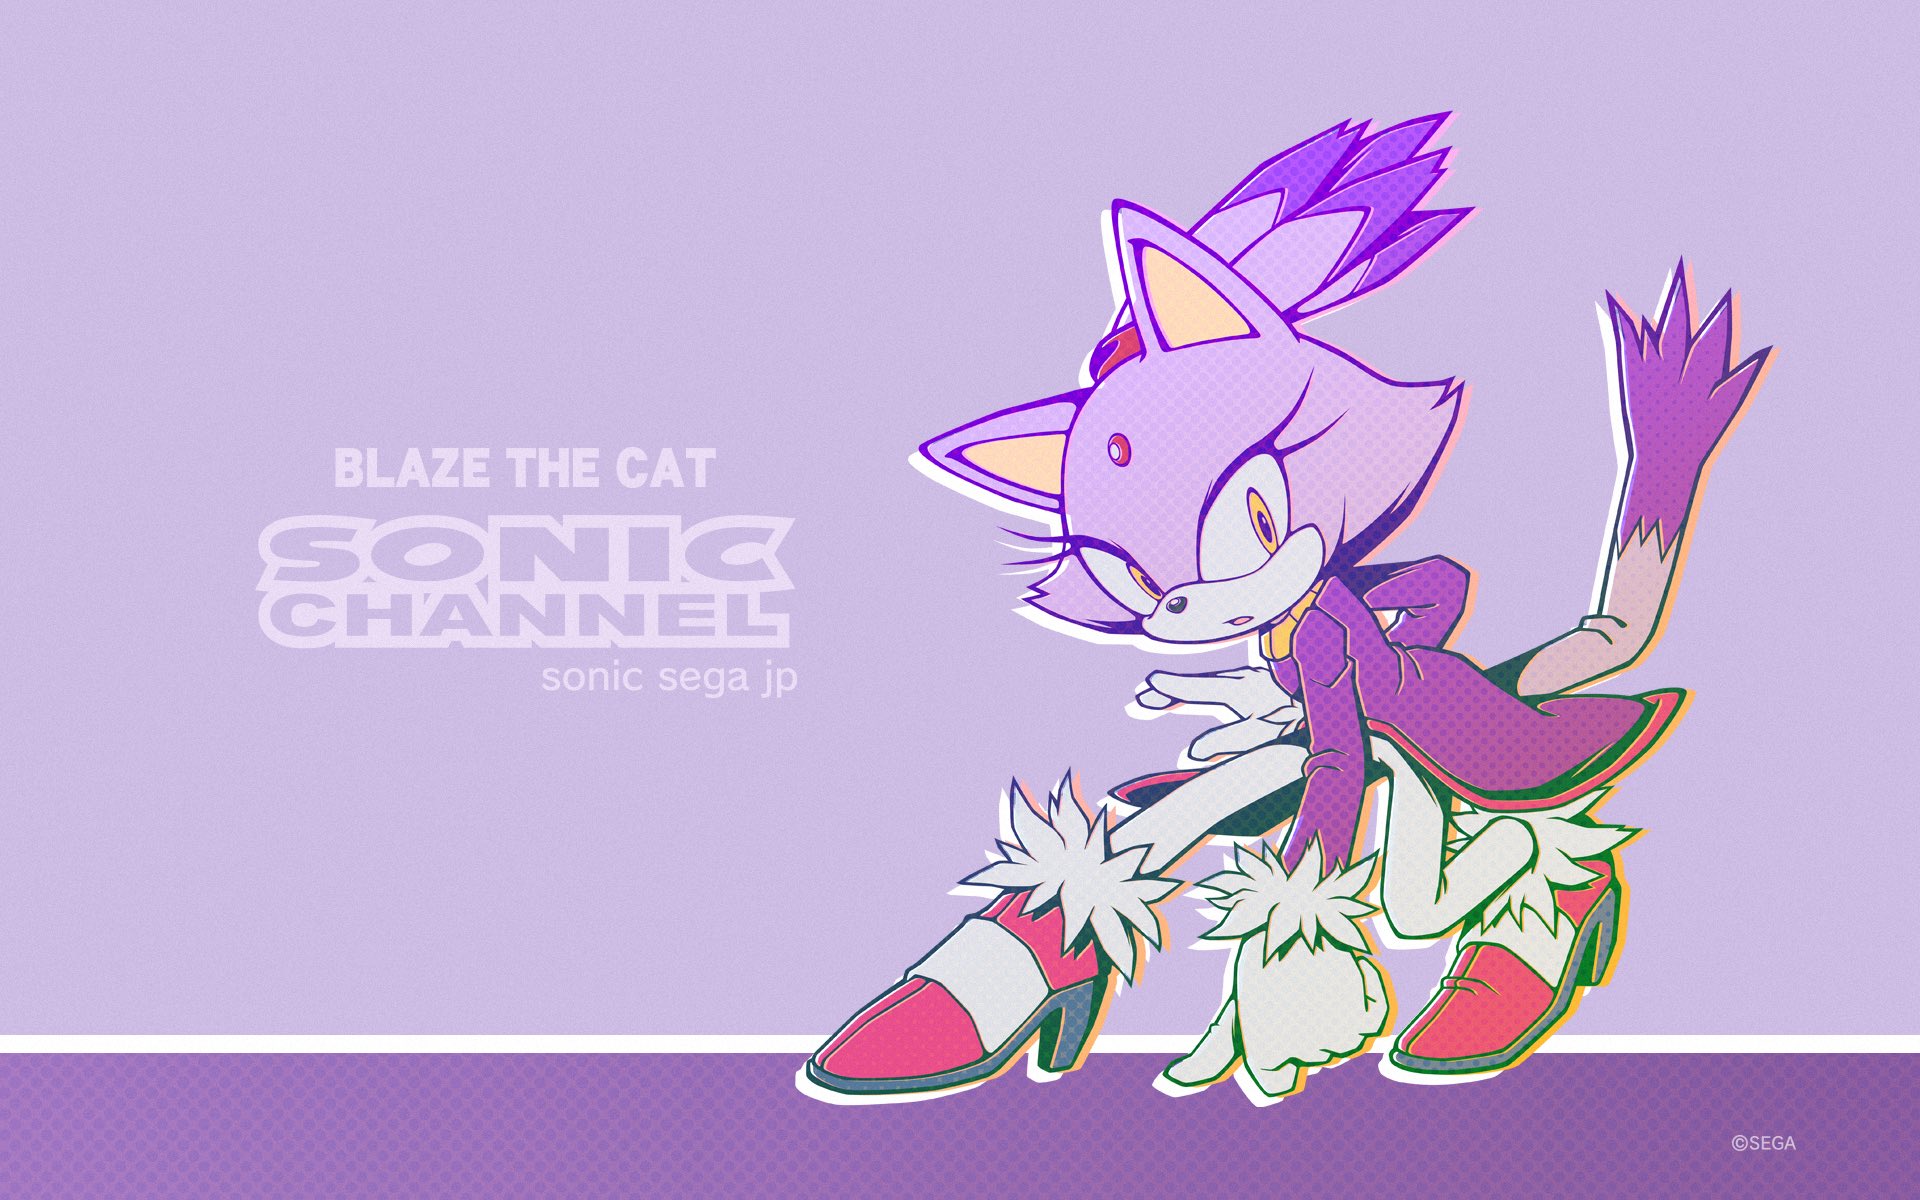 sonic, video game, sonic the hedgehog, blaze the cat, sonic channel